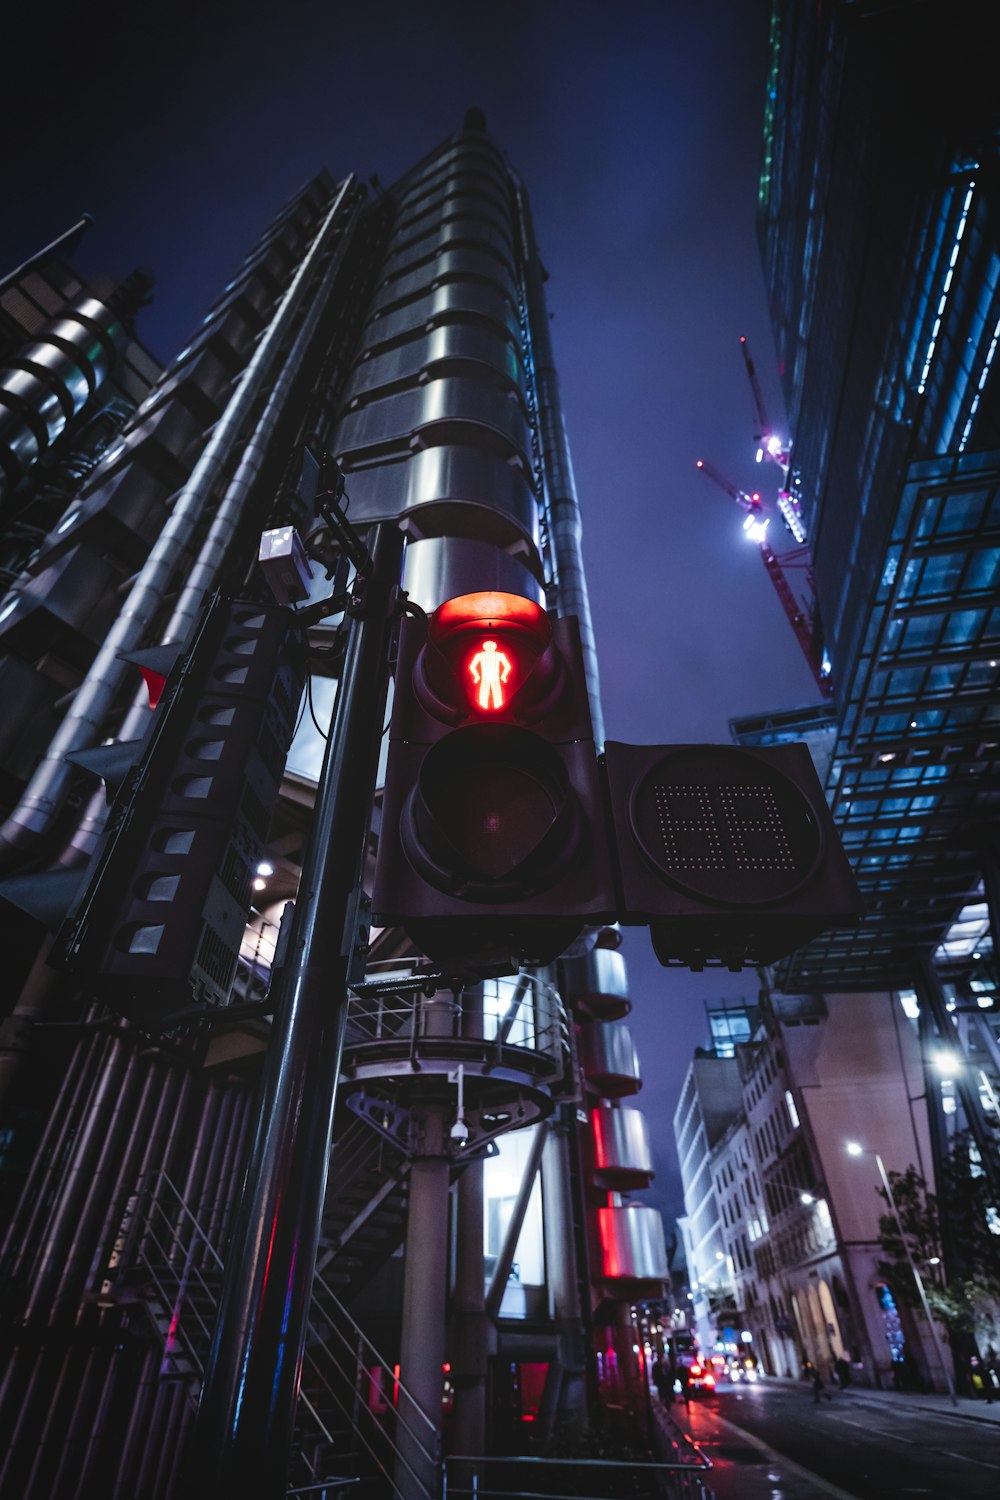 a traffic light on a pole in a city at night